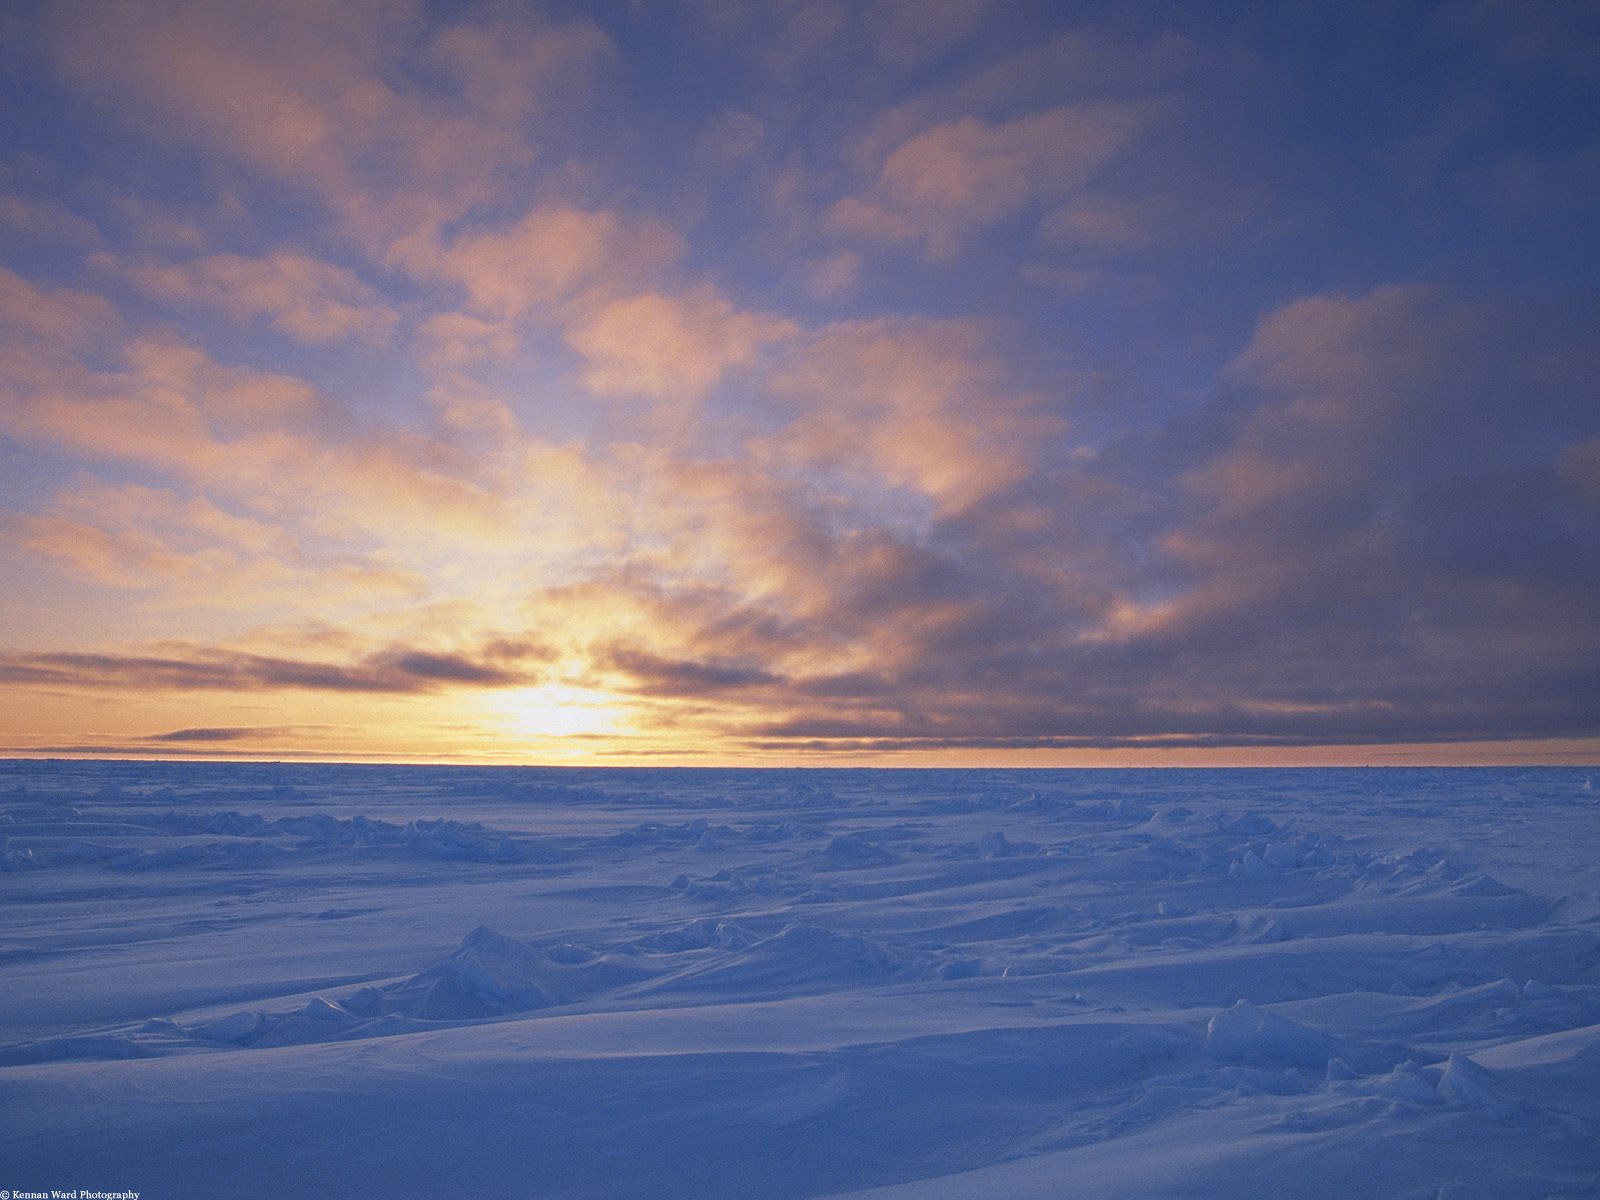 Arctic Ice Pack at Sunset, Canada